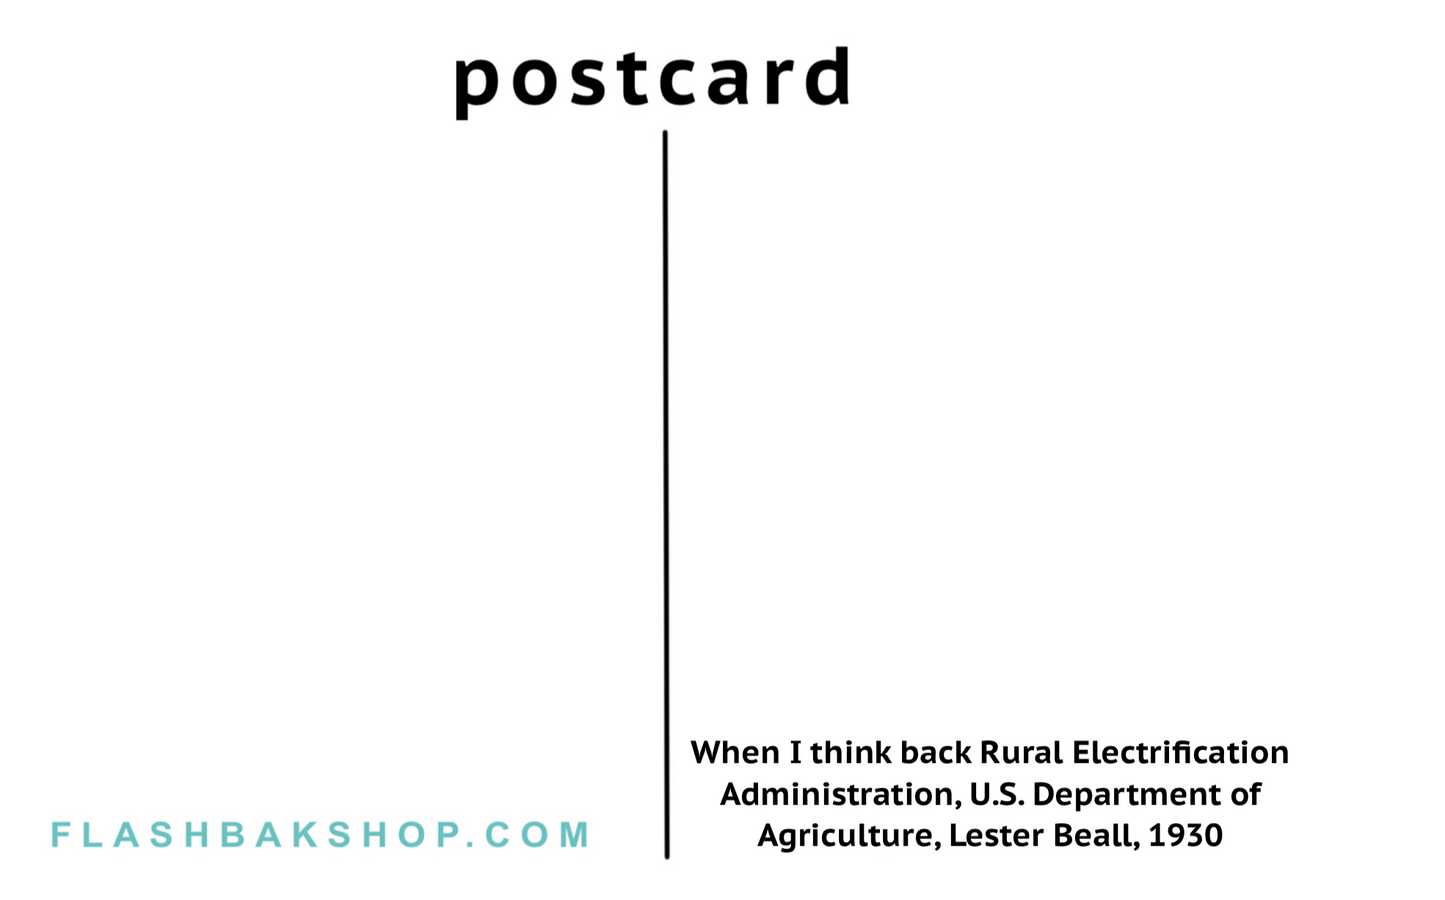 When I Think Back, Rural Electrification Administration, U.S. Department of Agriculture by Lester Beall, 1930 - Postcard